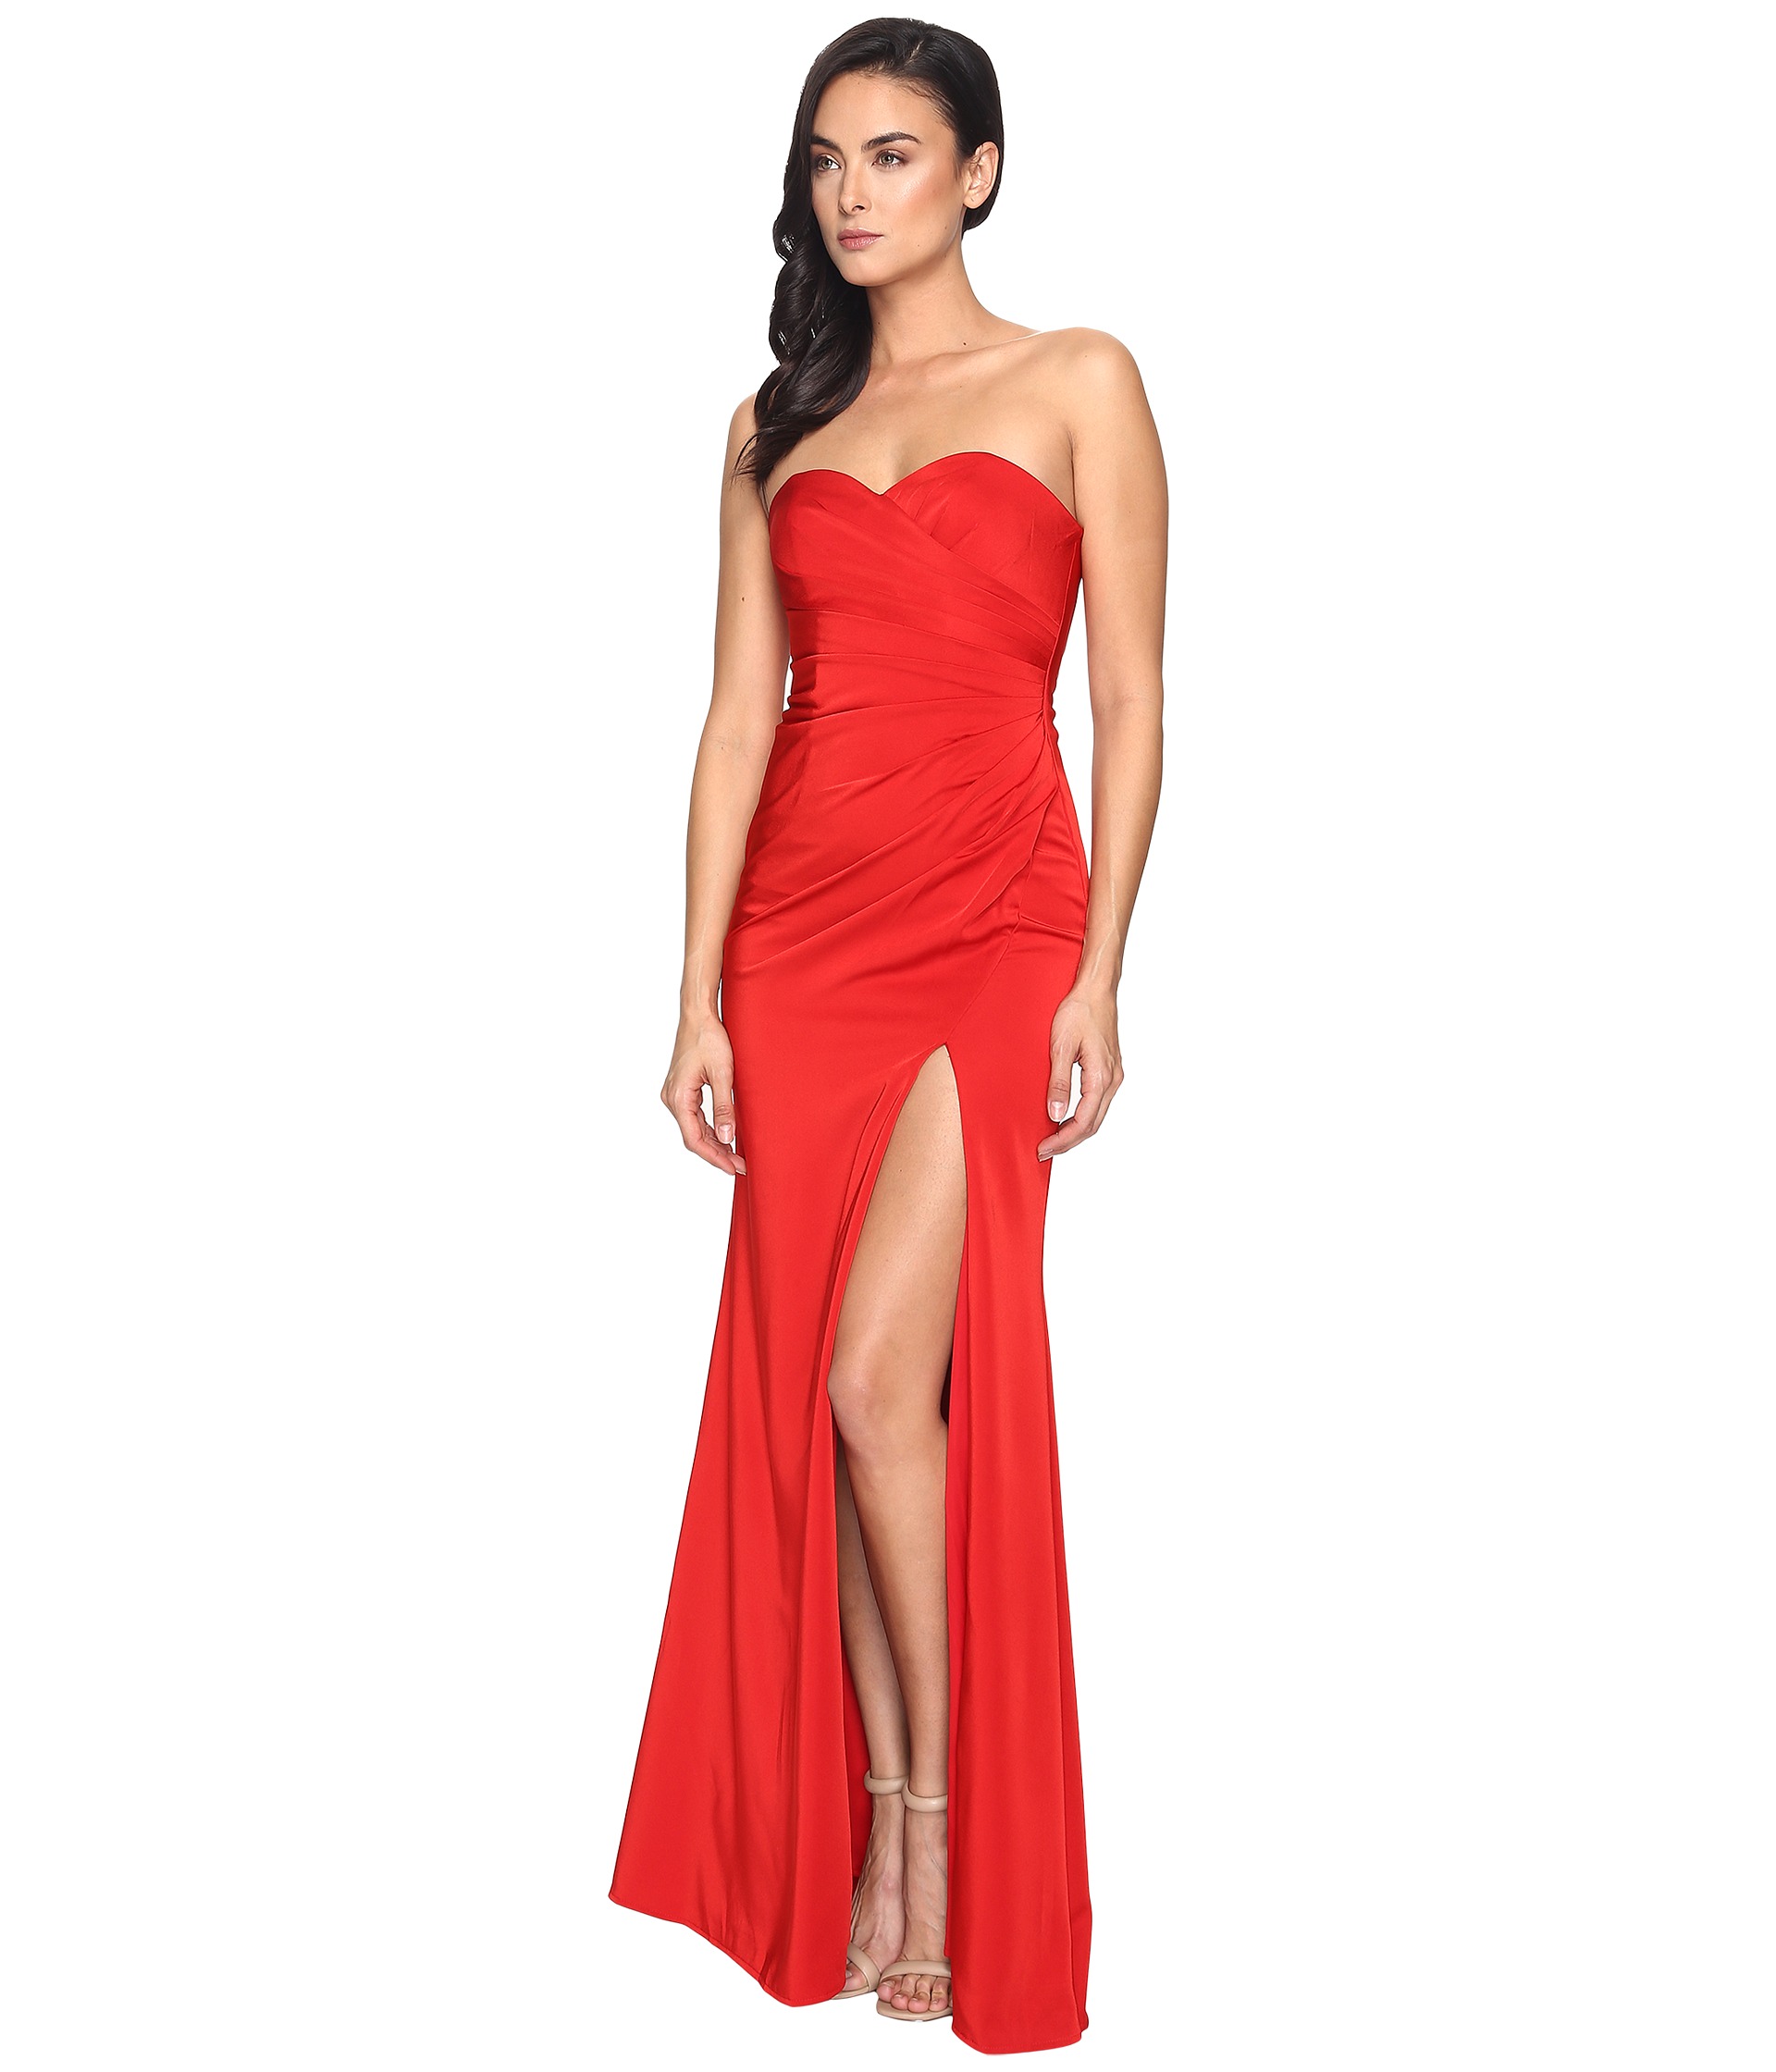 Faviana Faille Satin Strapless w/ Side Draping 7891 at Zappos.com